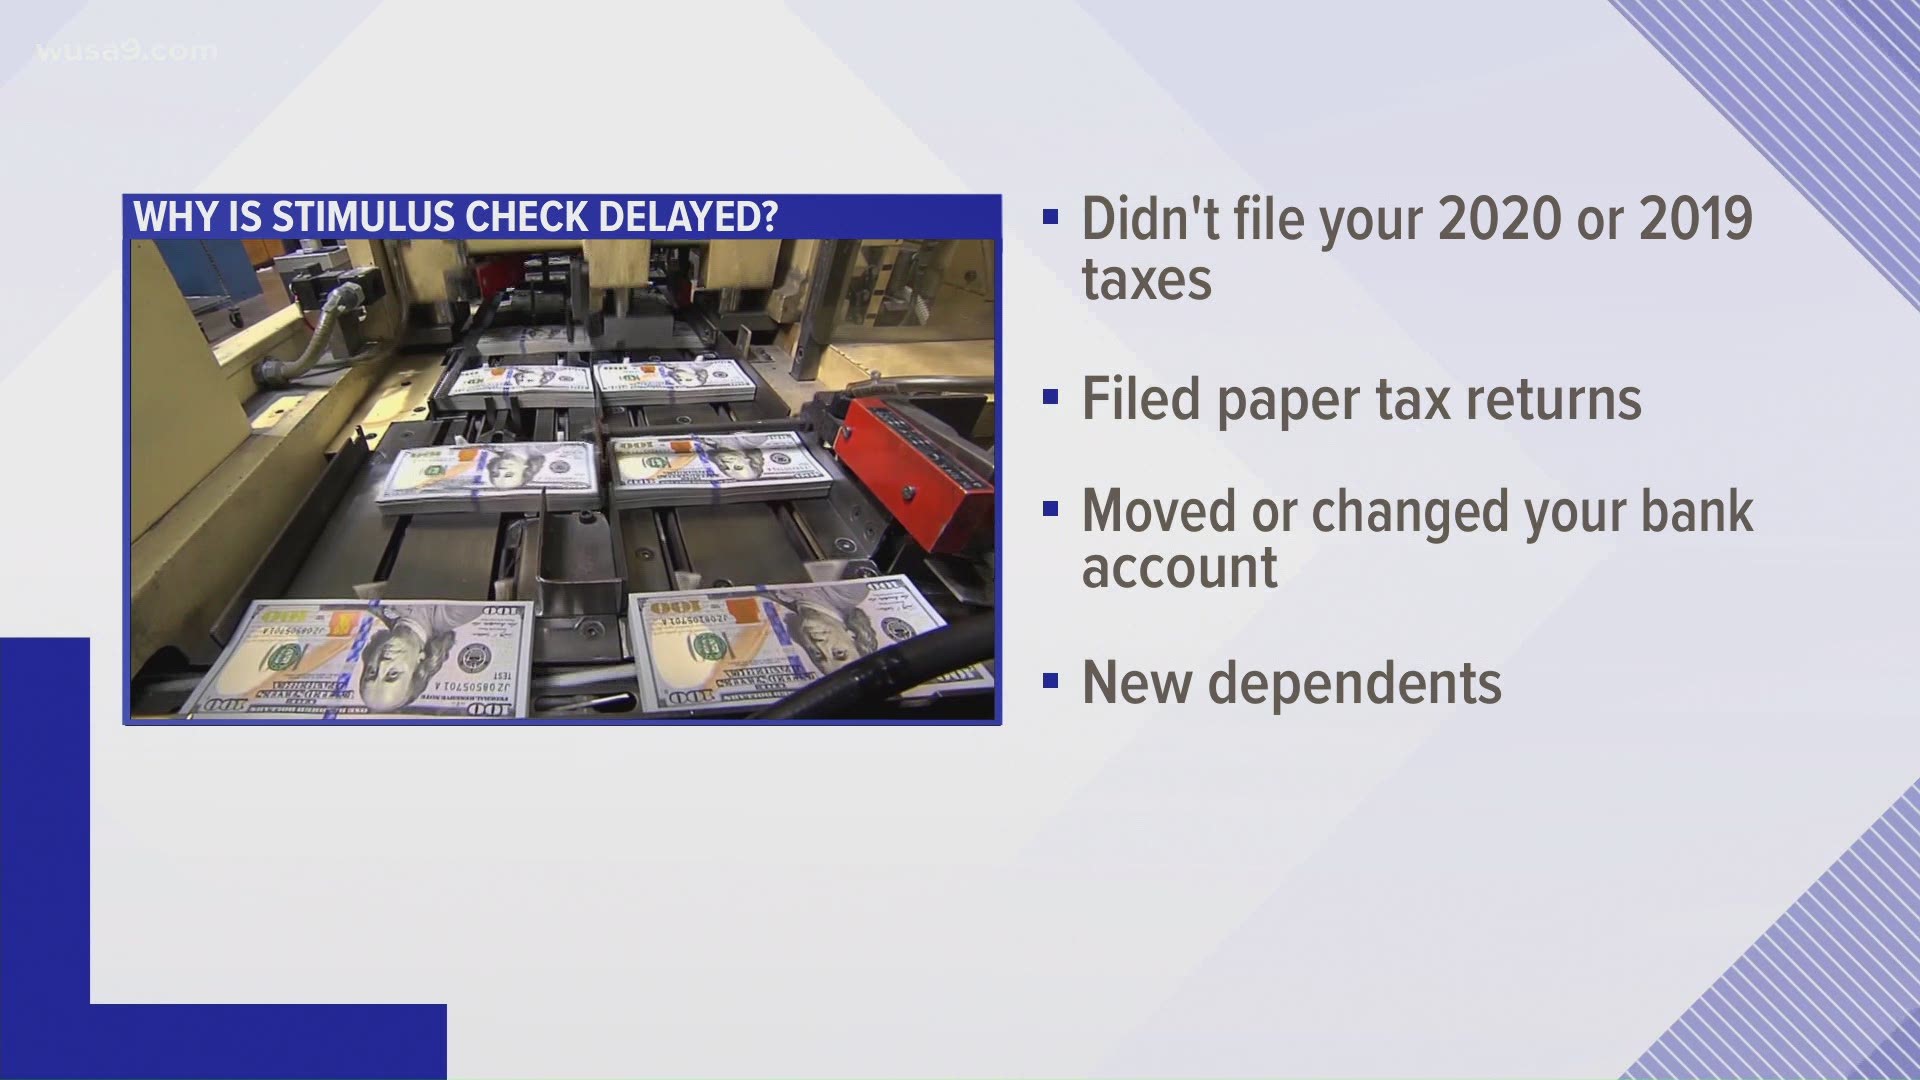 One reason could be if you haven't filed your 2019 or 2020 tax return